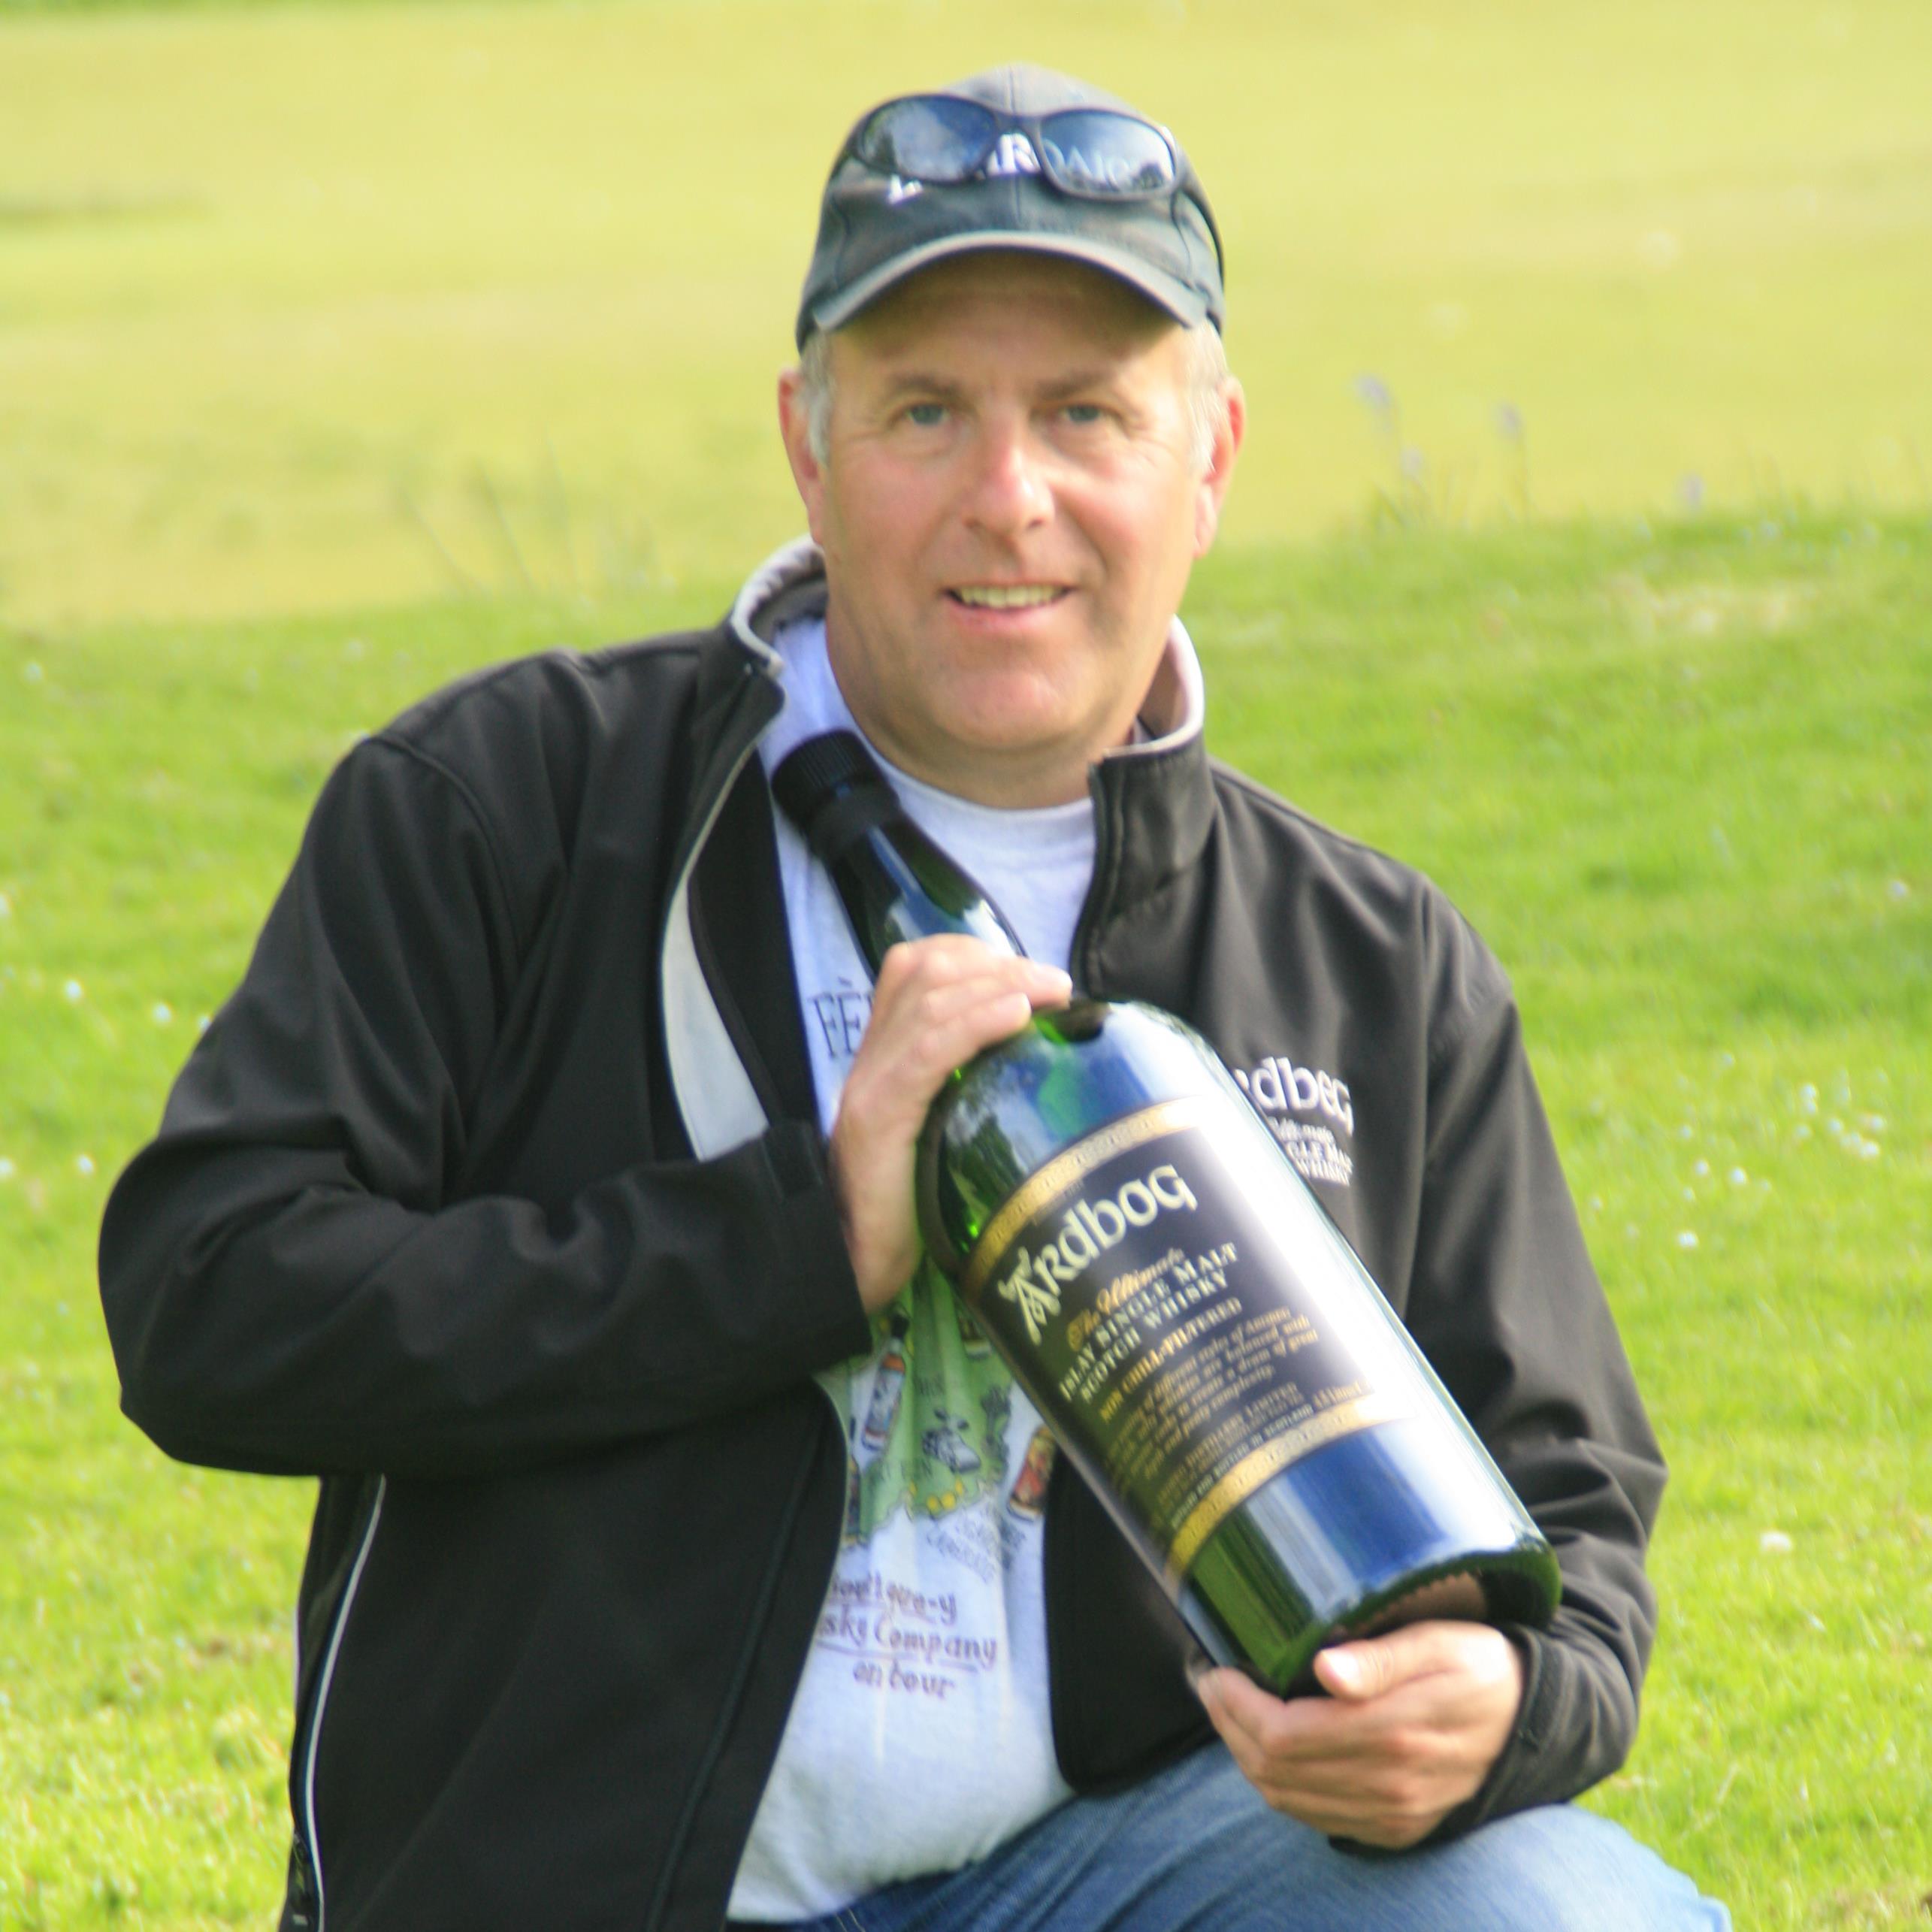 Retired & living the island life, founder of the Western Isles Whisky Club, previously manager at Scotch Whisky Experience, collects single malts & enjoy a dram